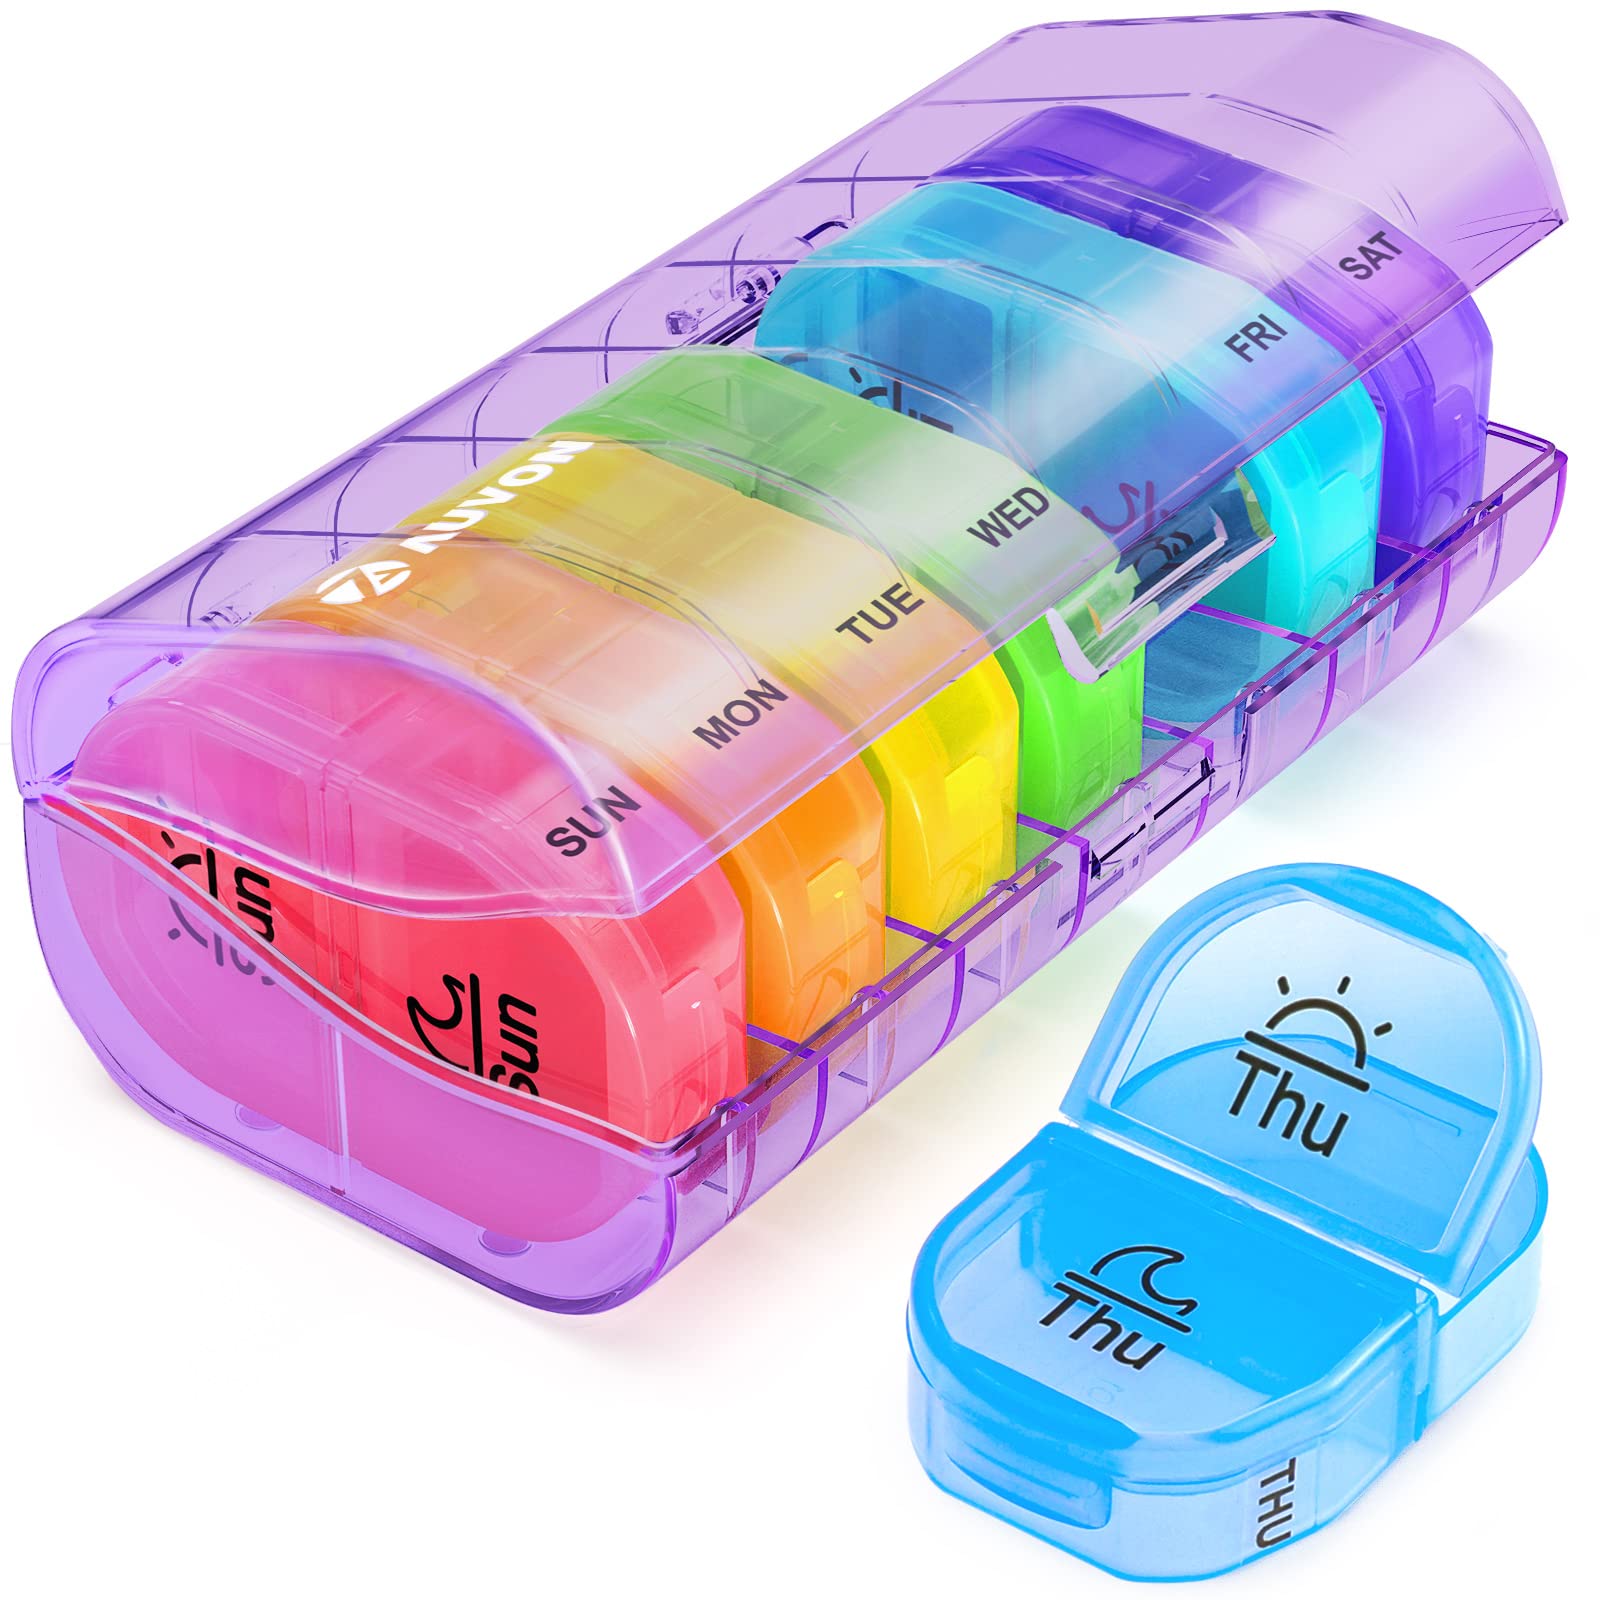 AUVON Weekly Pill Organizer 4 Times a Day with 7 Daily Large Pill Box Cases